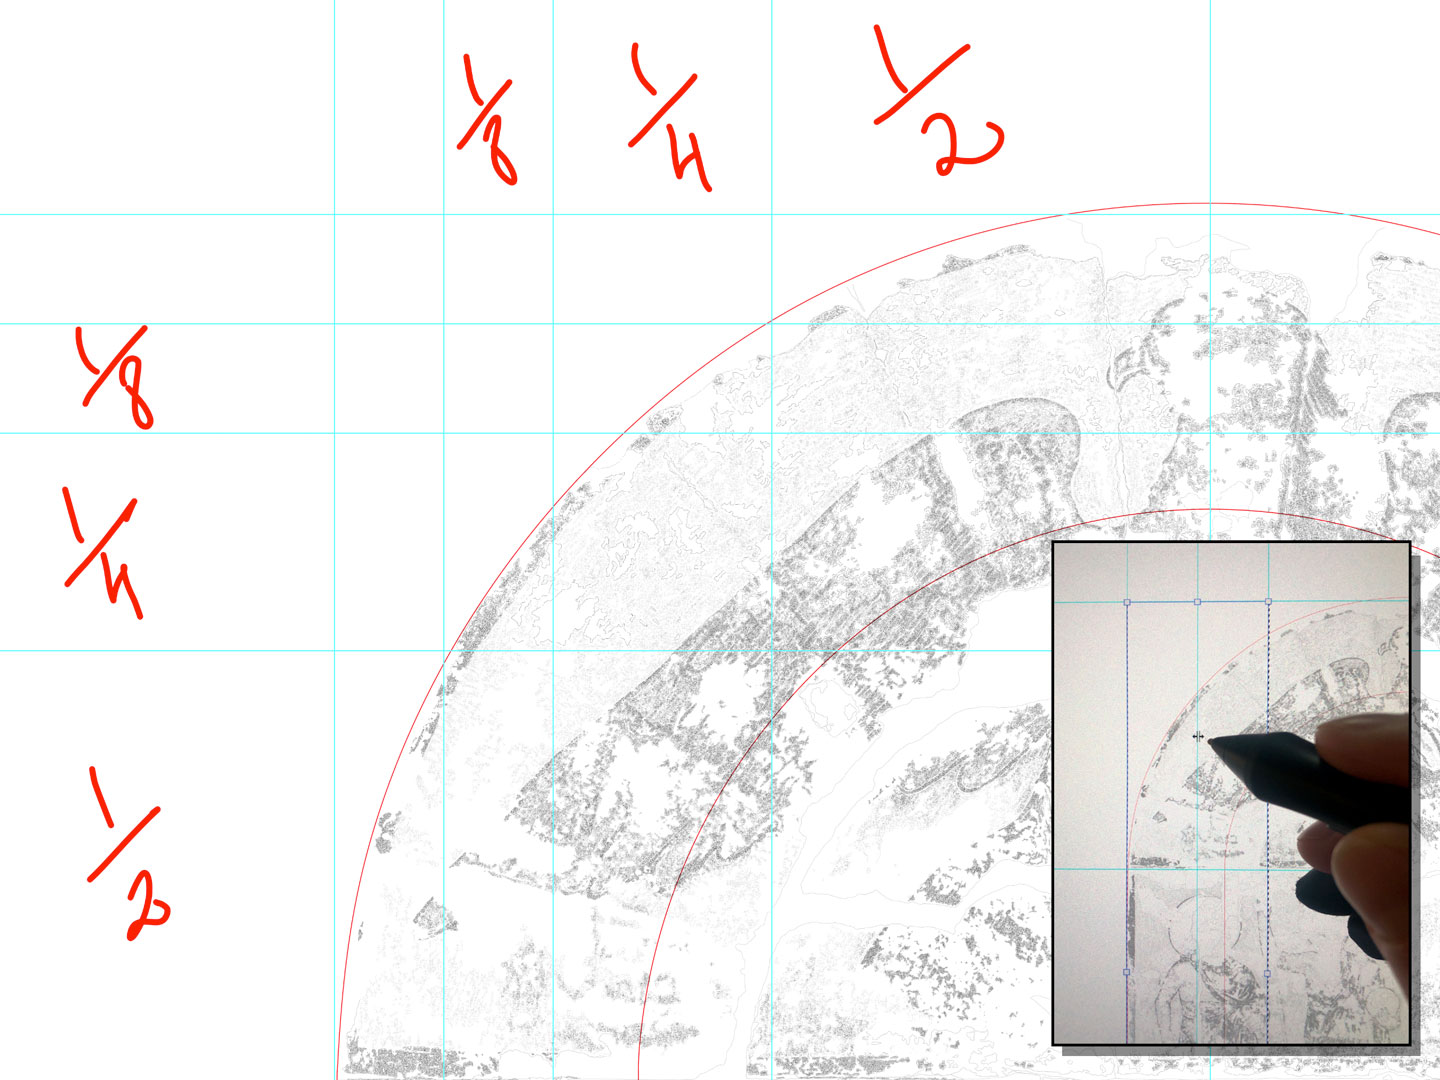 Using multiple modification tools to warp the Apse drawing